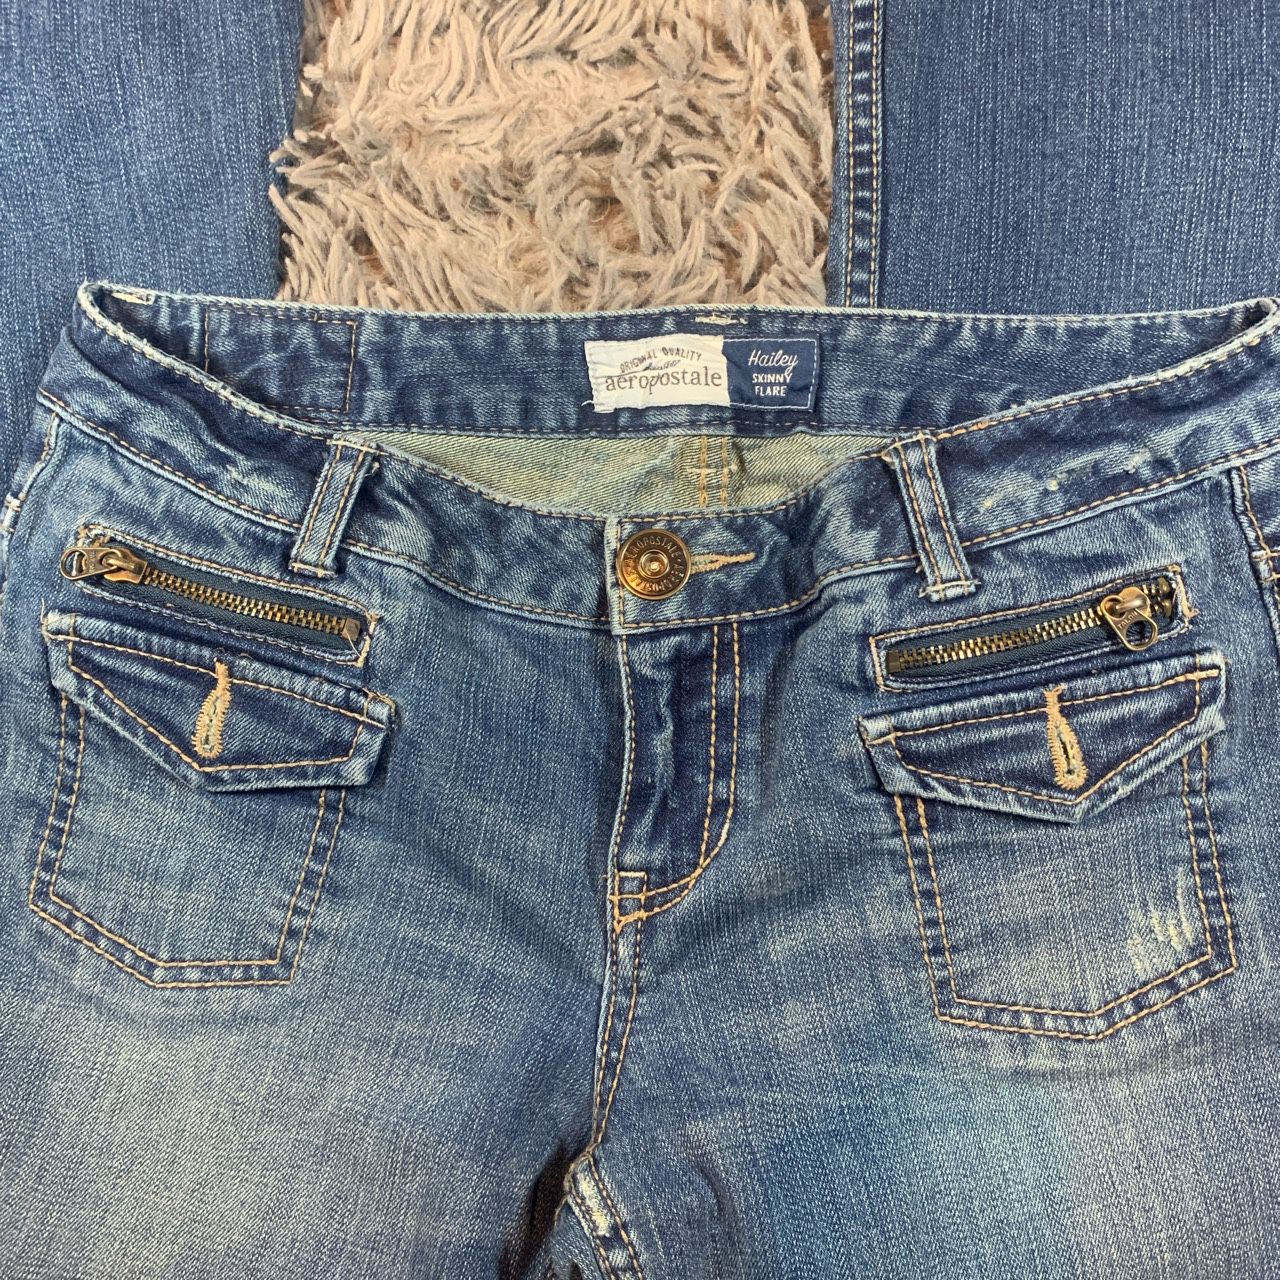 Jeepster Panelled Denim Flares – The Hippie Shake